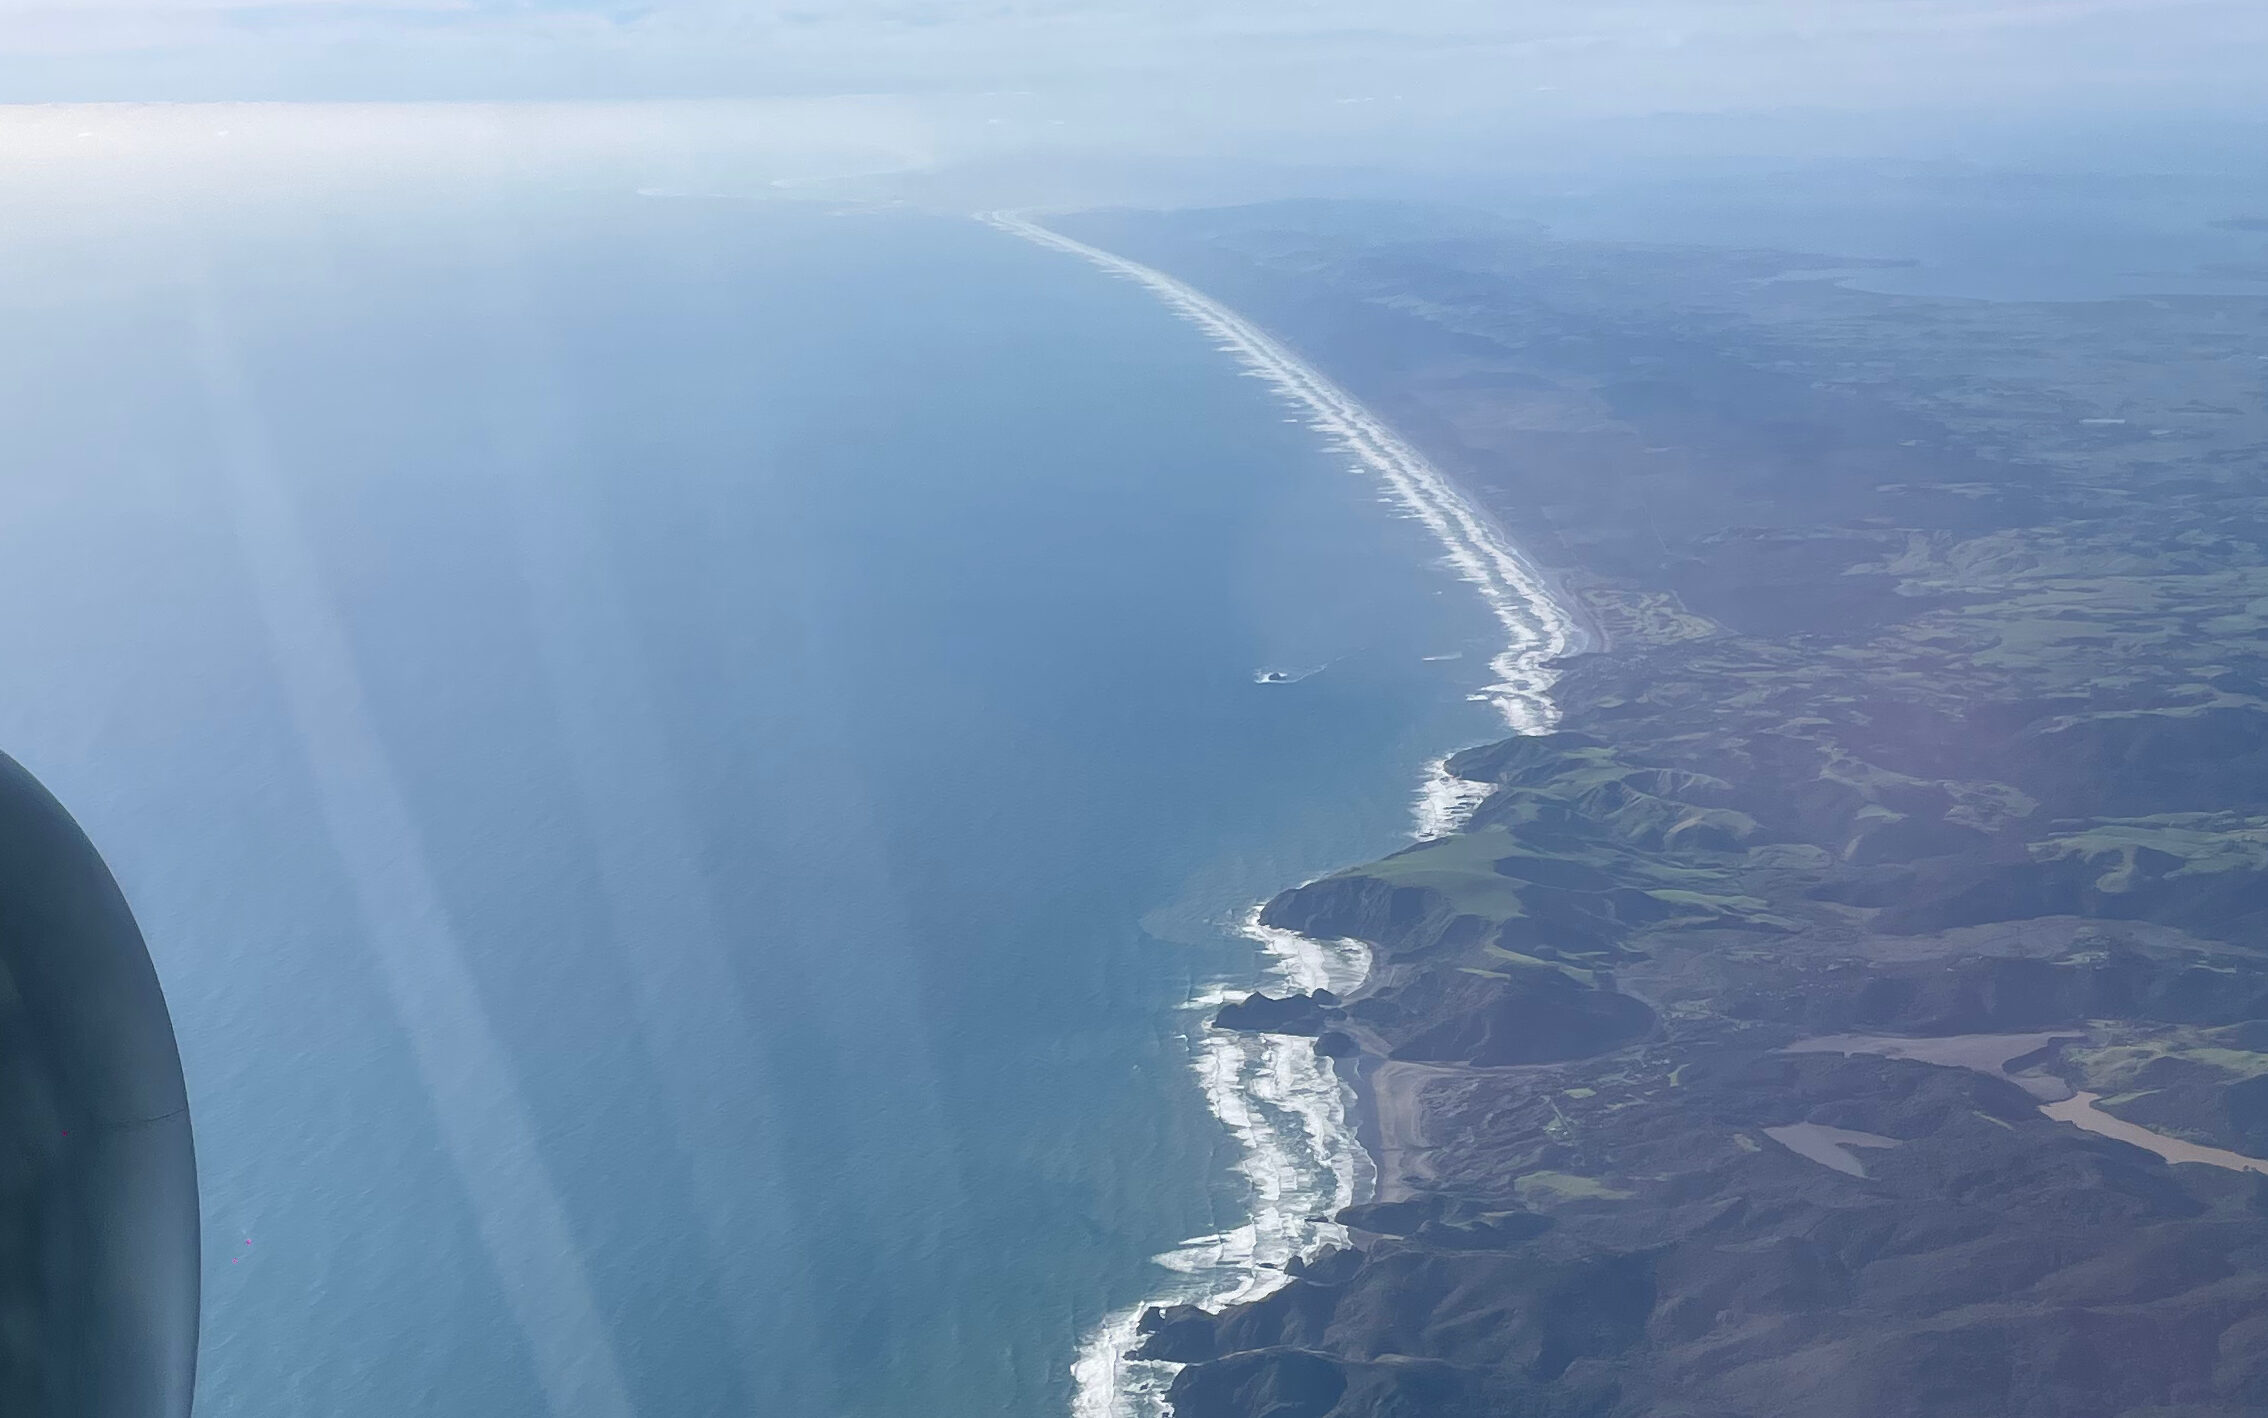 View of the West Coast of the North Island of New Zealand from an Airplane on approach into Auckland Airport